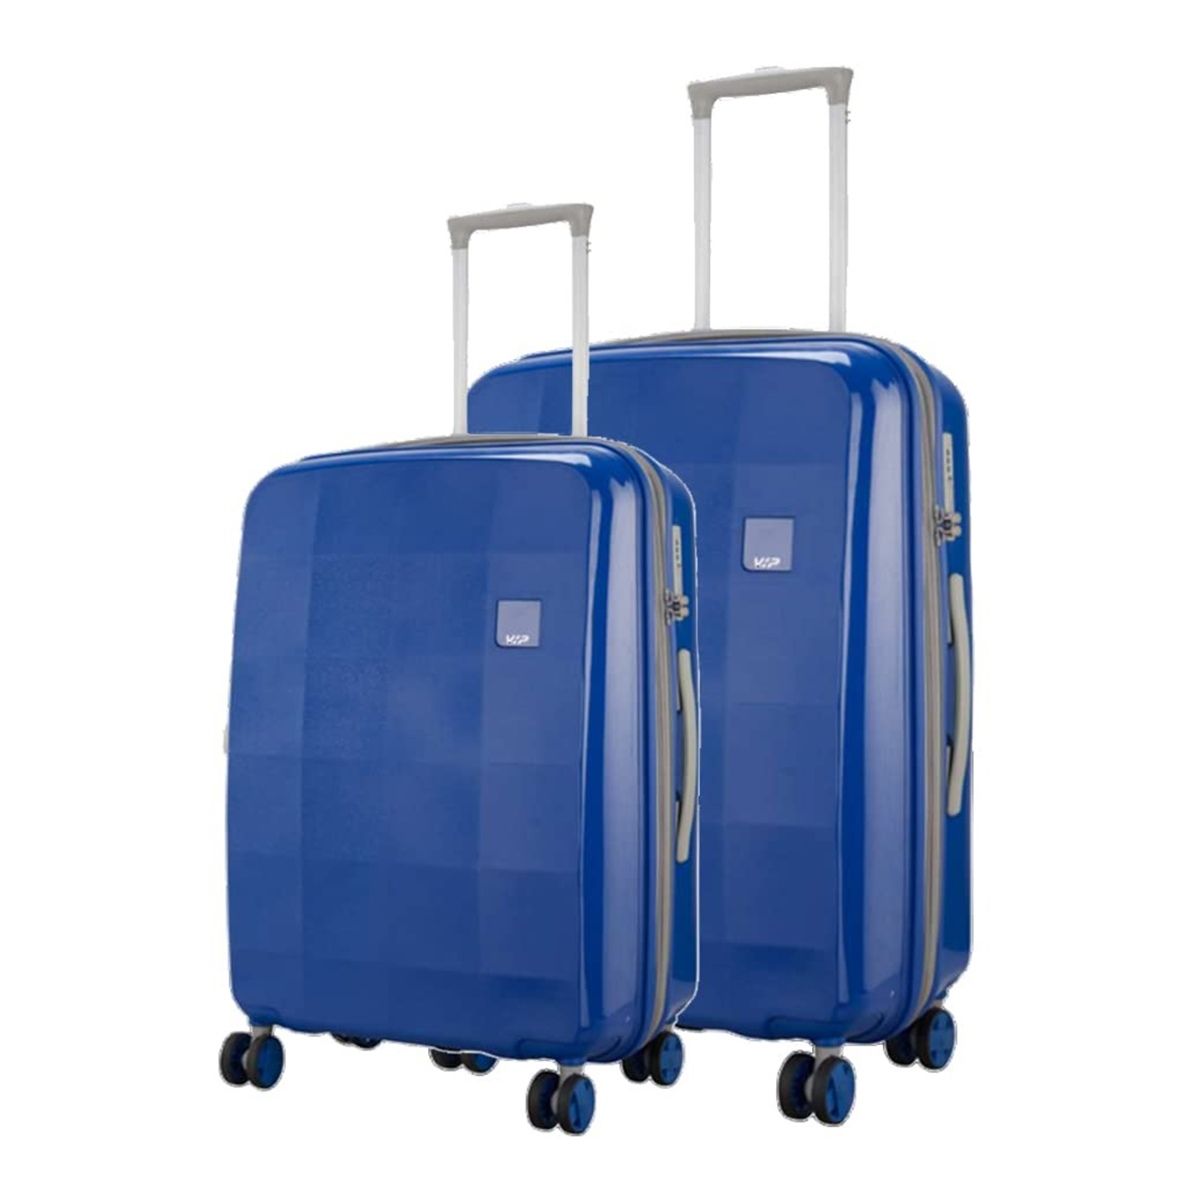 VIP ceptor set of 2 bags 69 cms and 56 cms Check-in Suitcase - 26 inch Teal  - Price in India | Flipkart.com